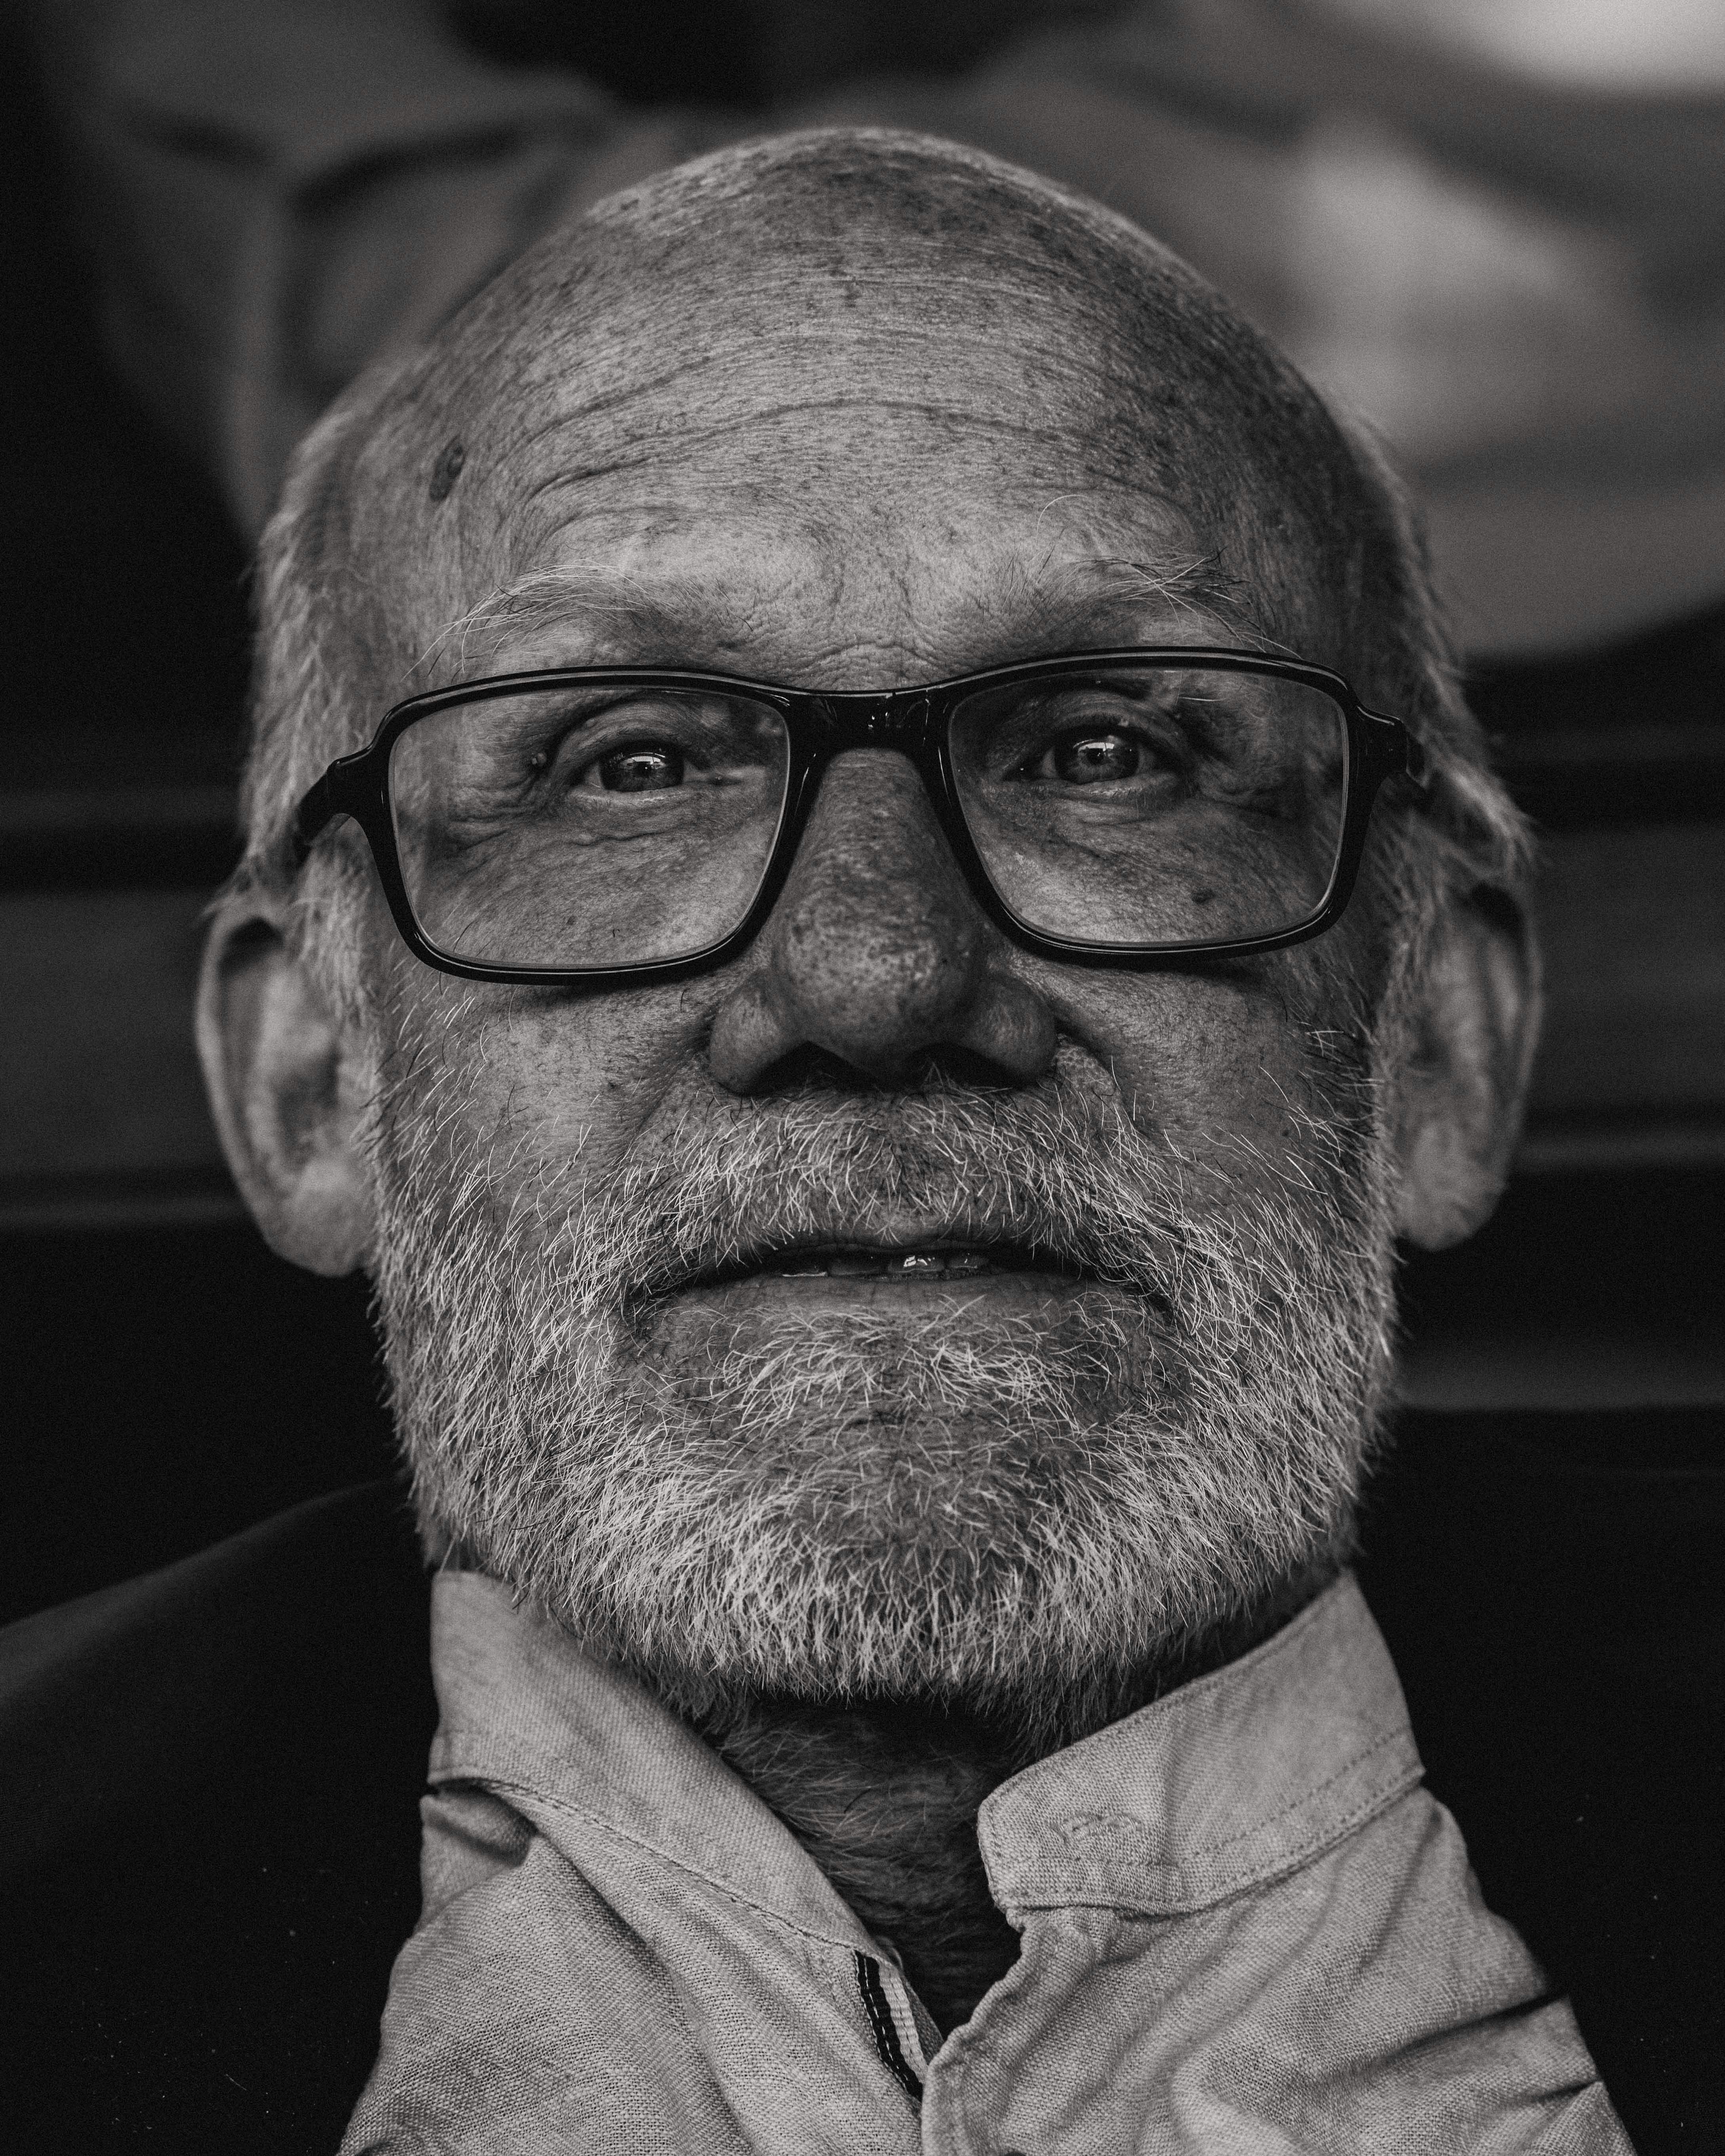 grayscale photography of man's face